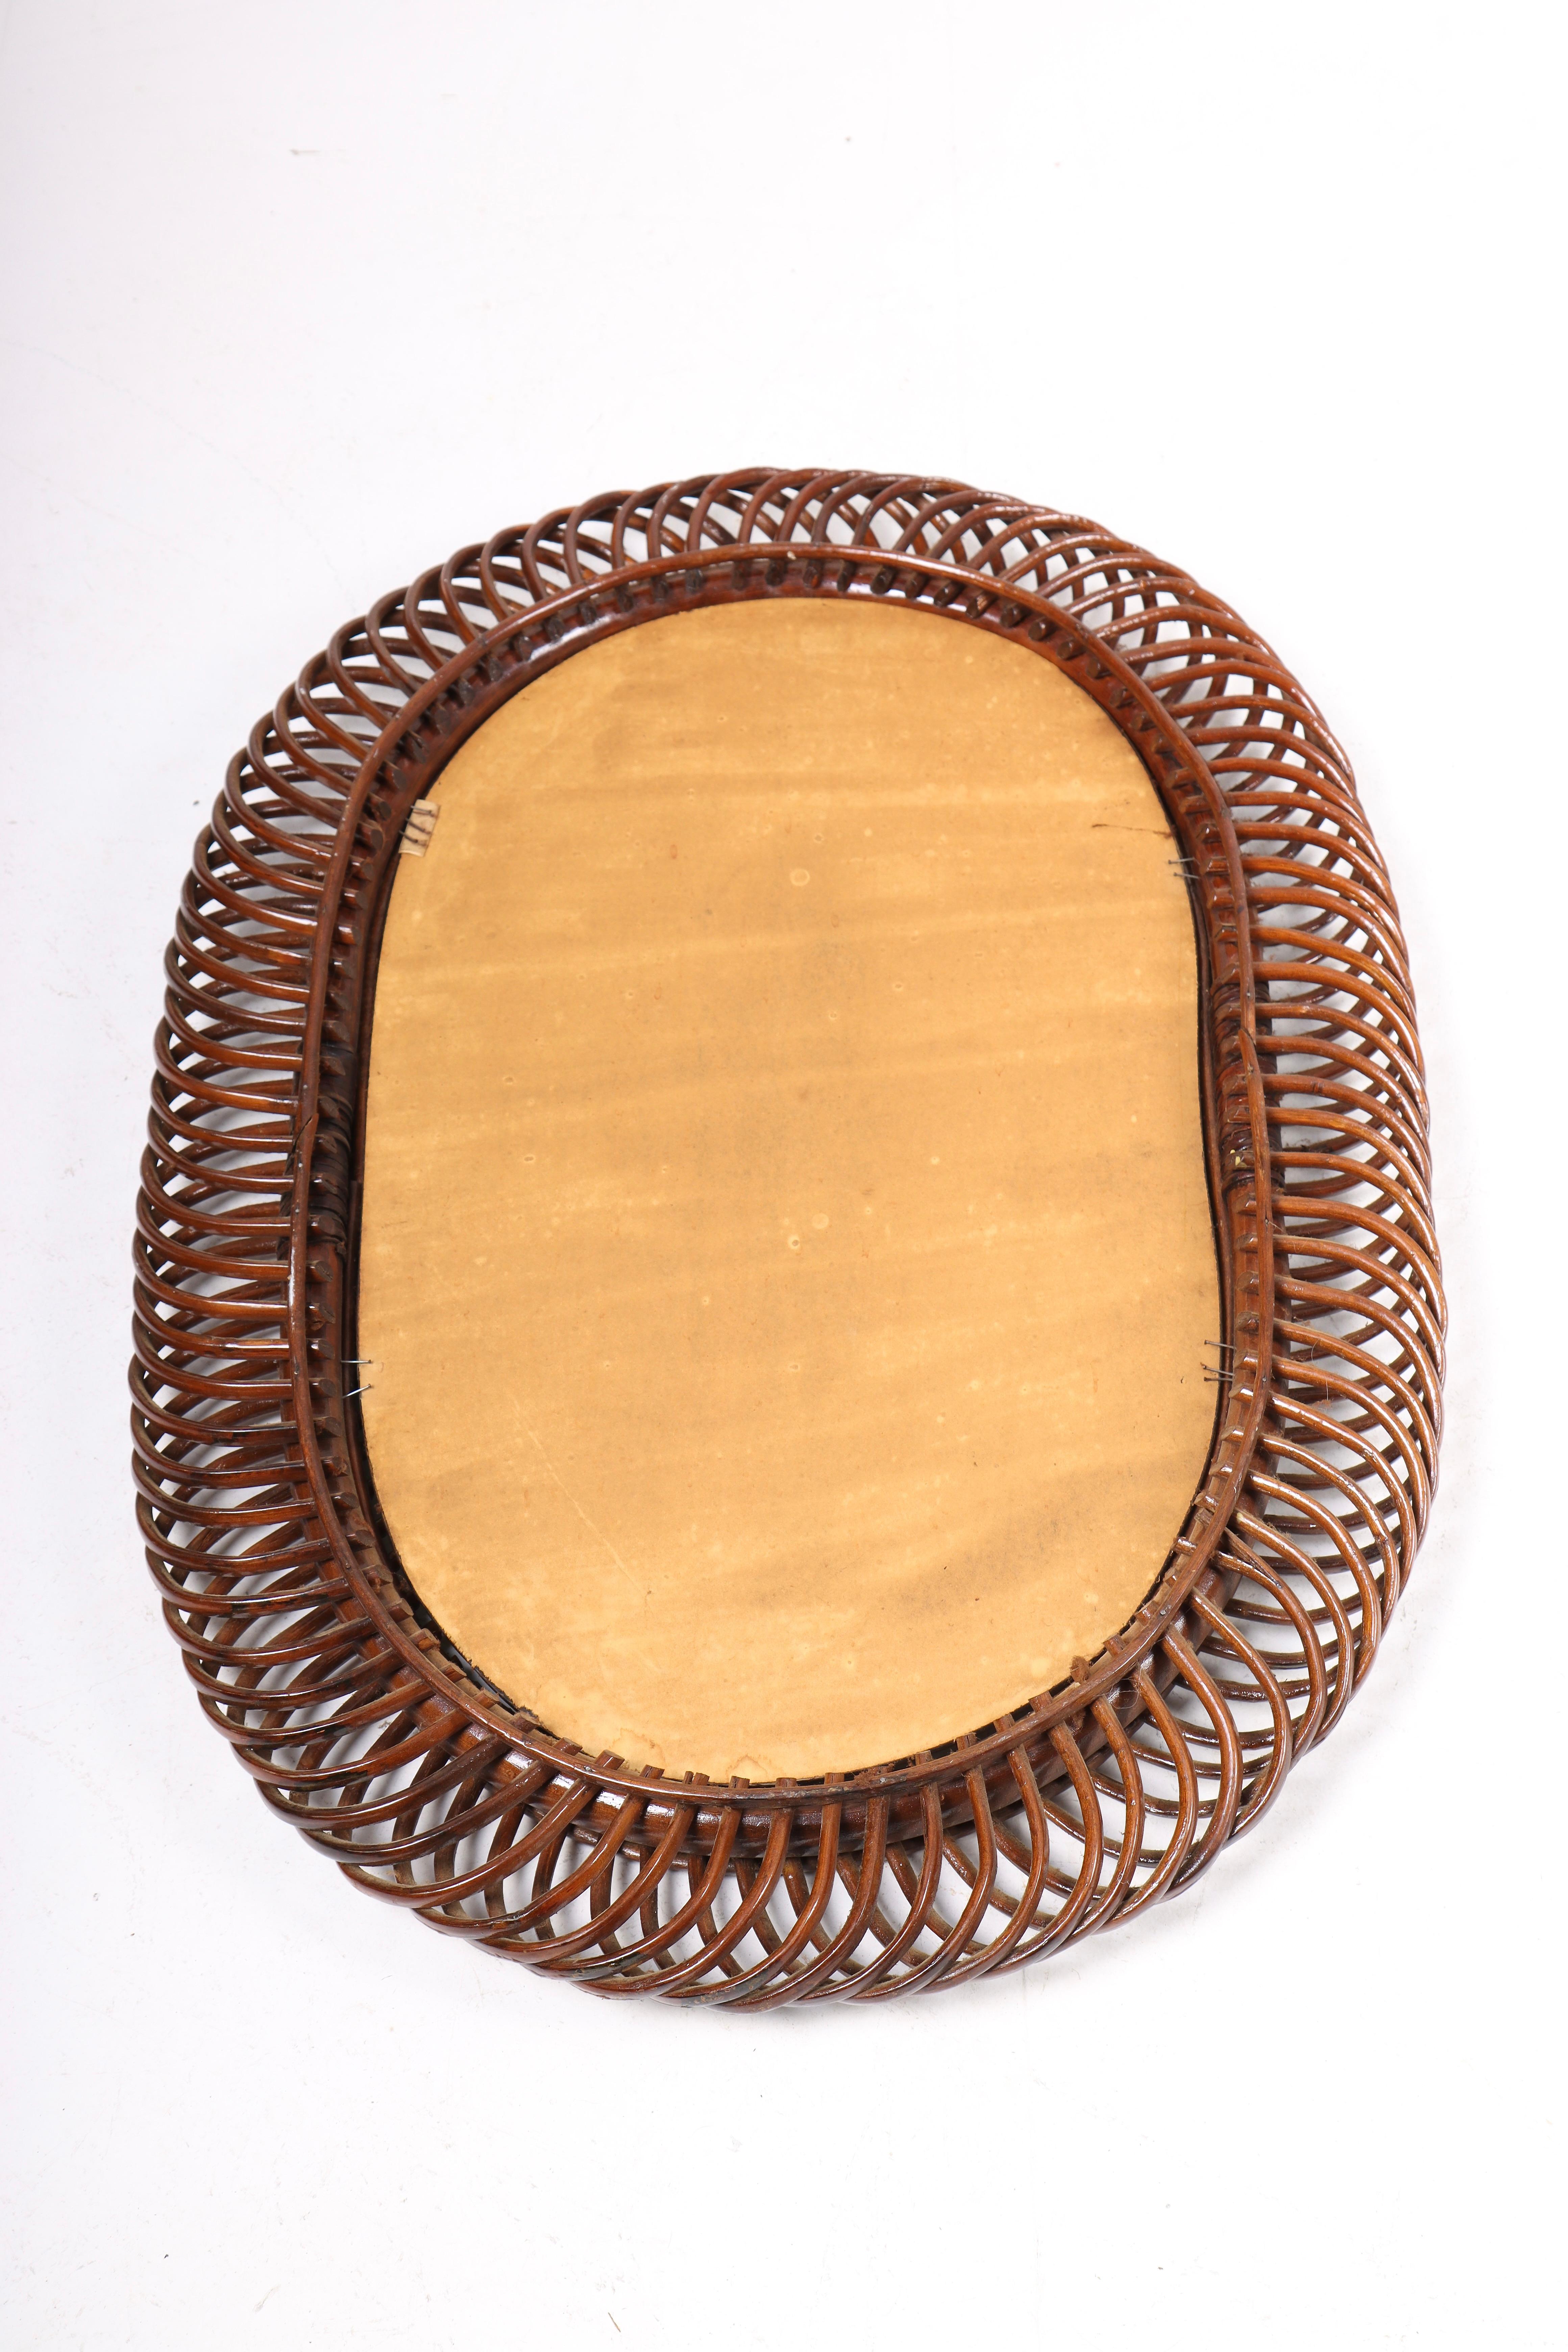 Midcentury Italian Wall Mirror in Bamboo, 1950s For Sale 1